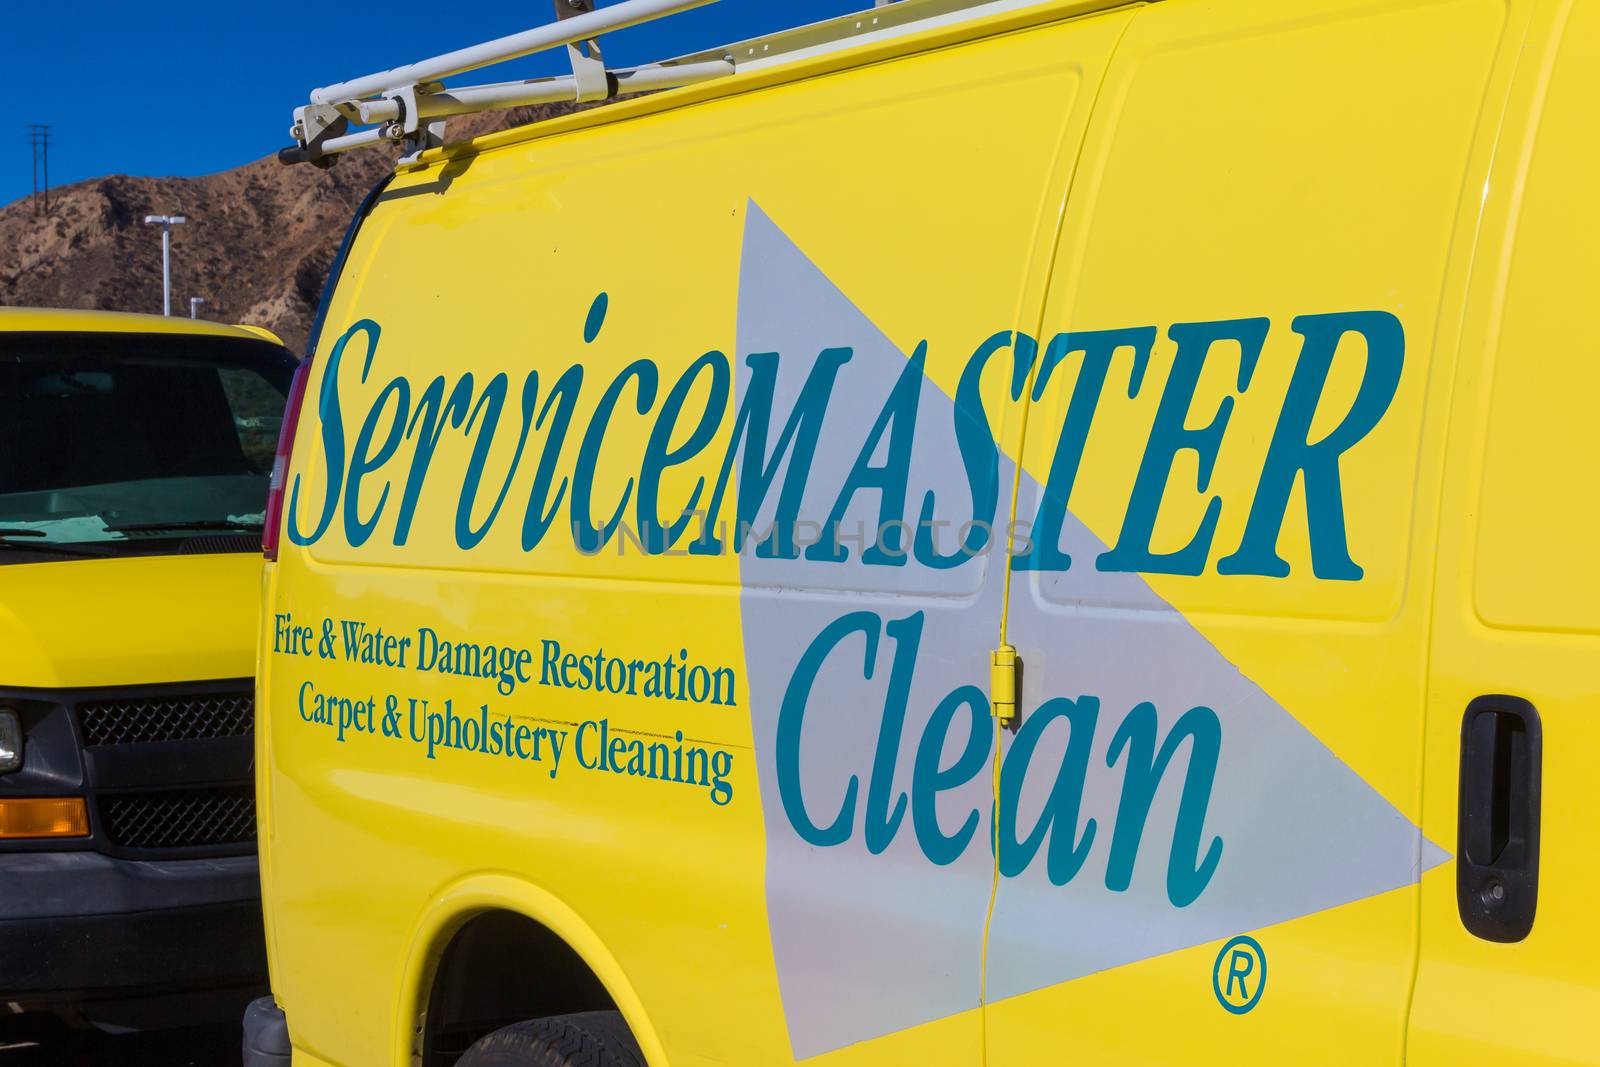 VALENCIA CA/USA - DECEMBER 26, 2015: ServiceMaster vehicle and logo. ServiceMaster is a public Fortune 1000 company that provides residential and commercial services.